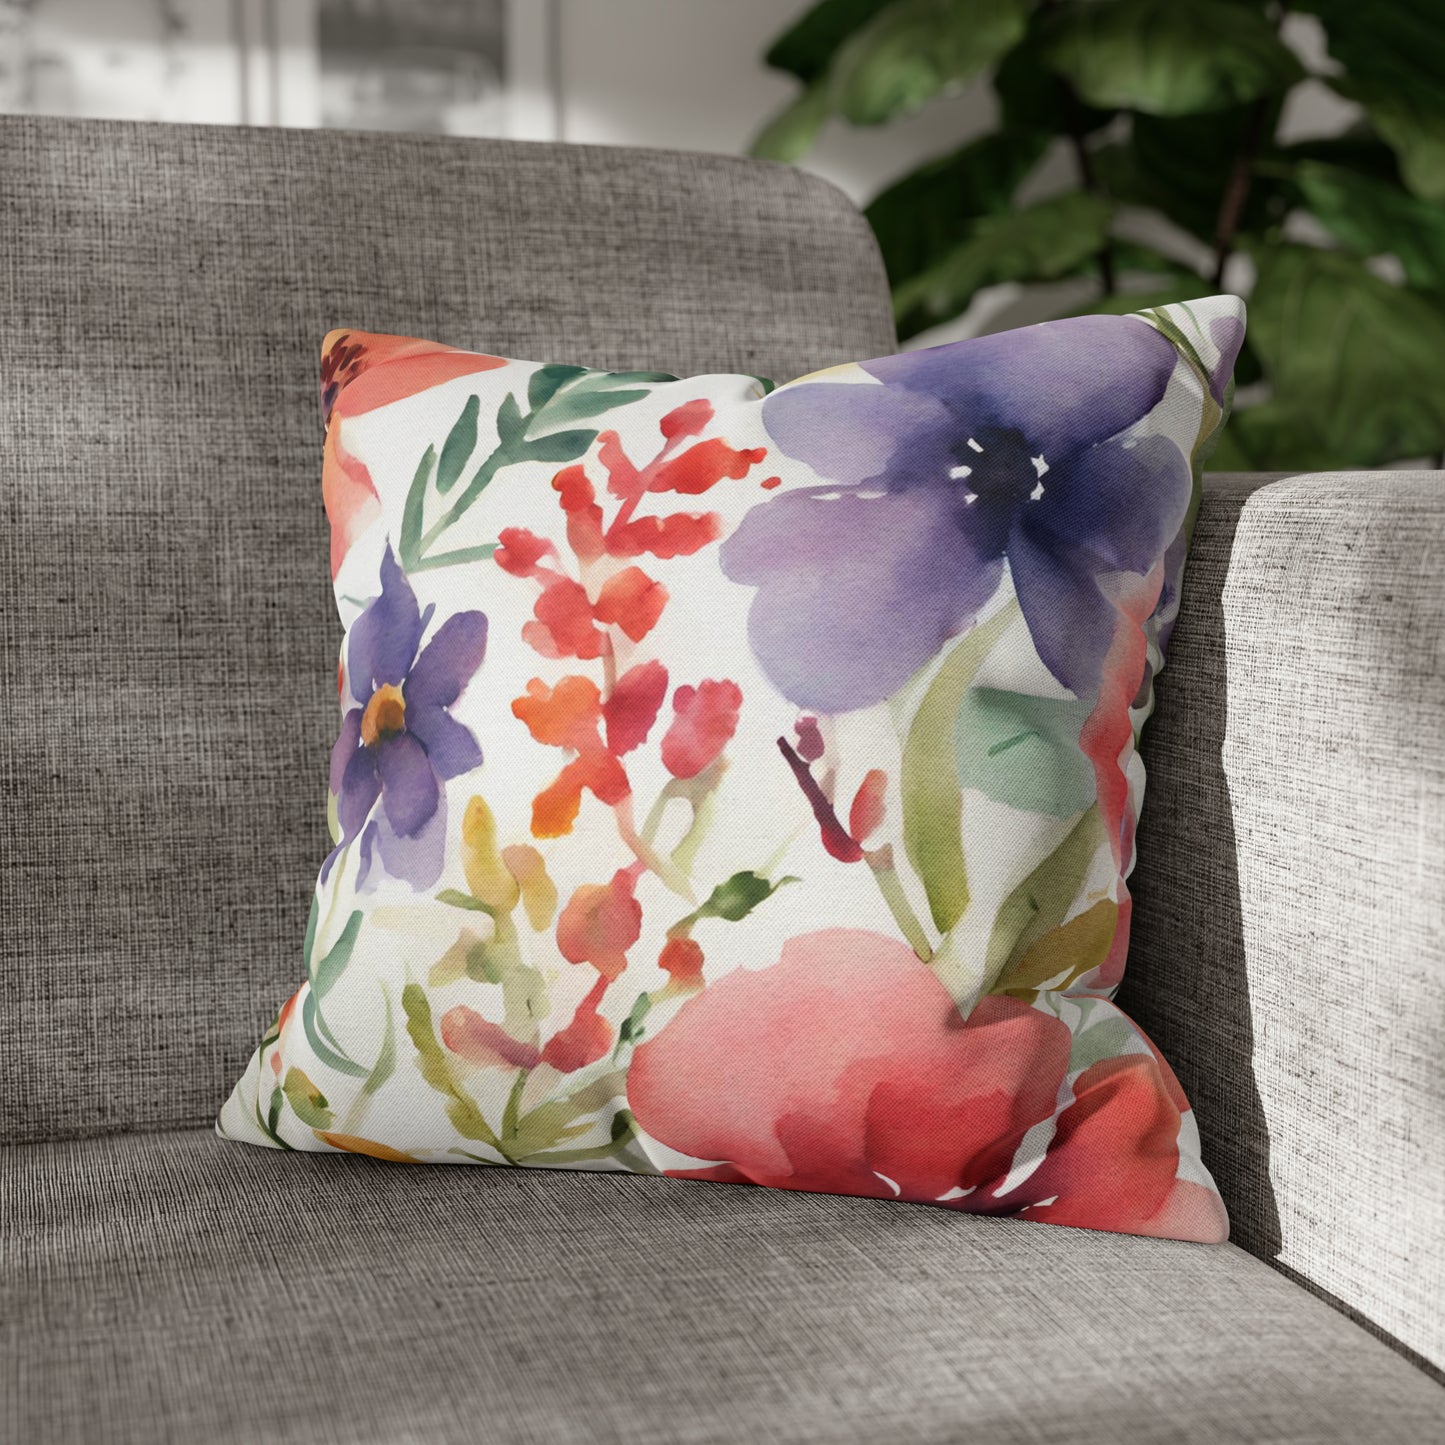 Cheerful Watercolor Floral Decorative Throw Pillow Cover